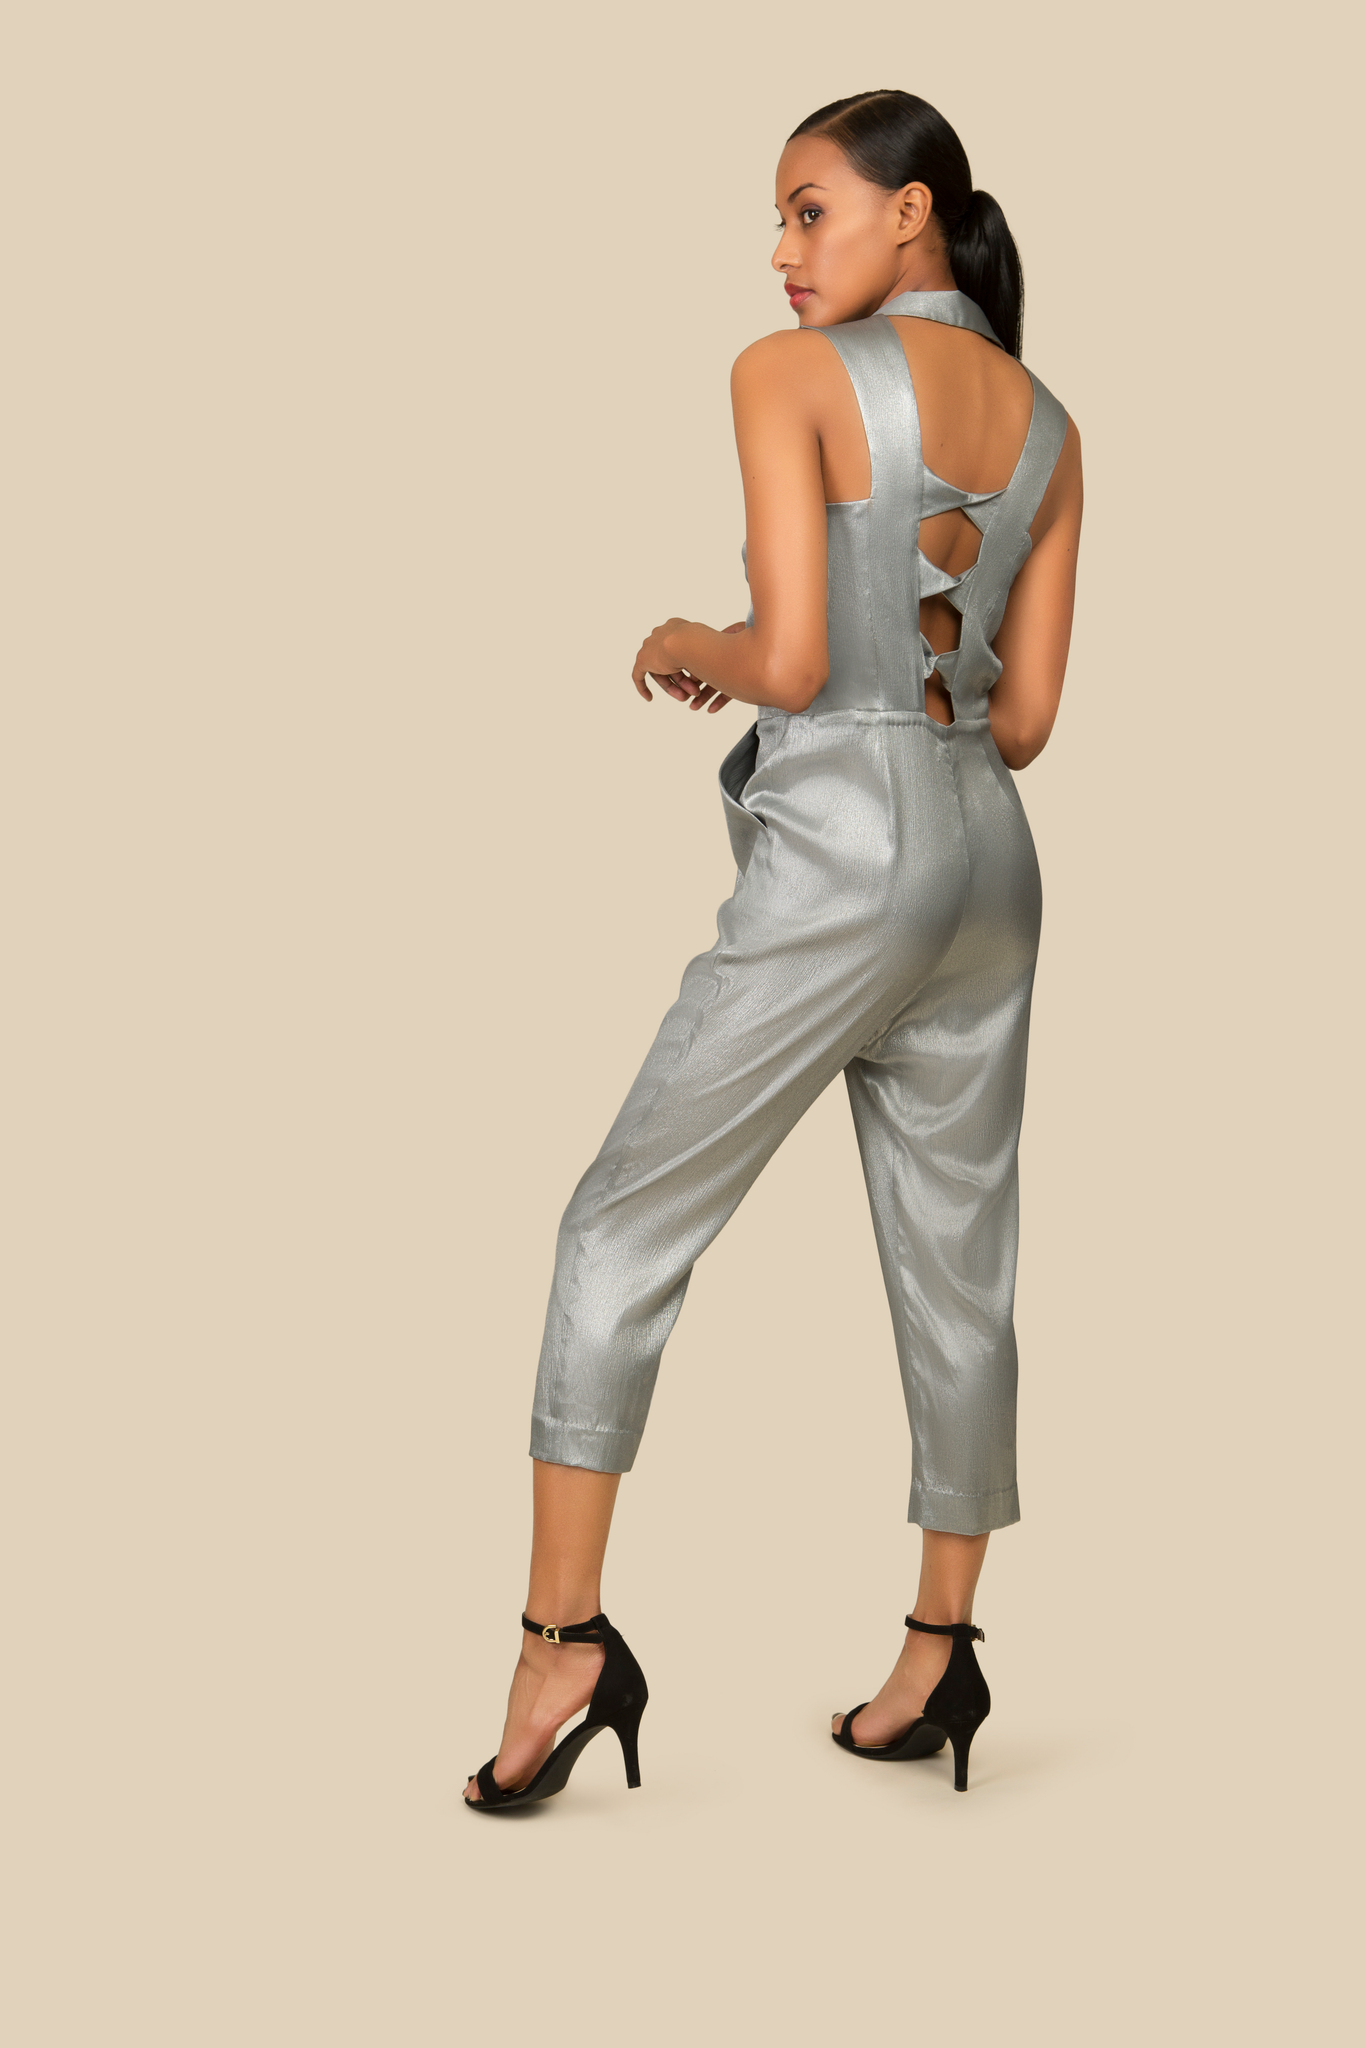 Silver Silk Jumpsuit with front zipper - AGAATI